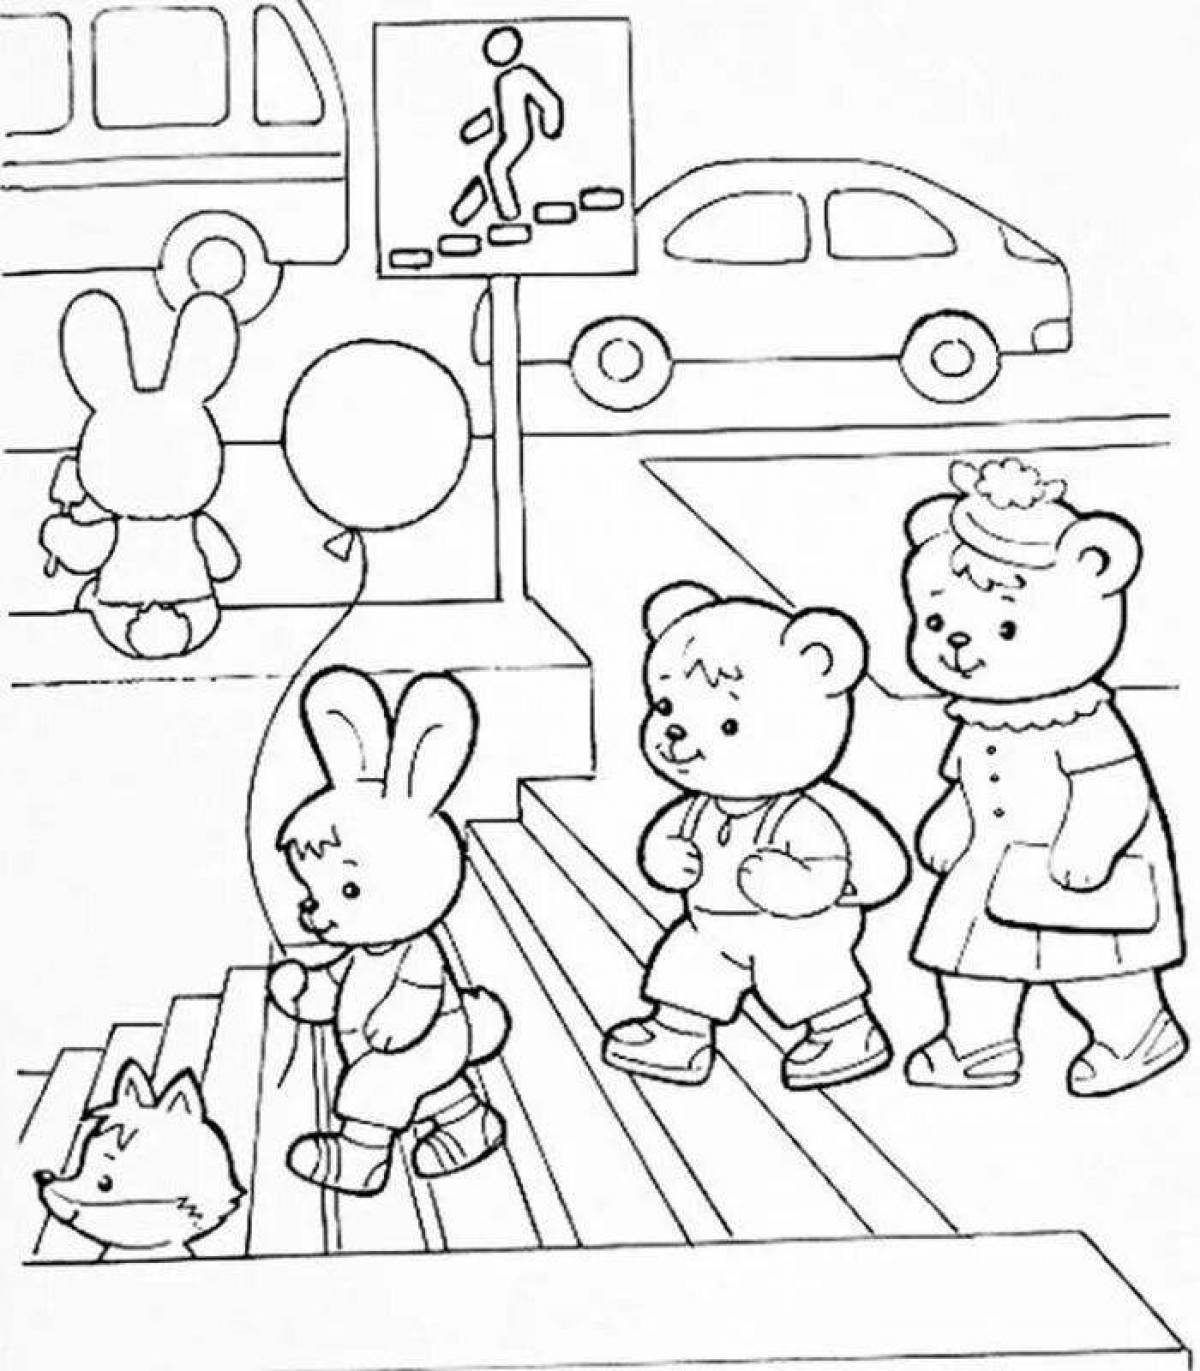 Color-bright coloring page for senior group of kindergarten